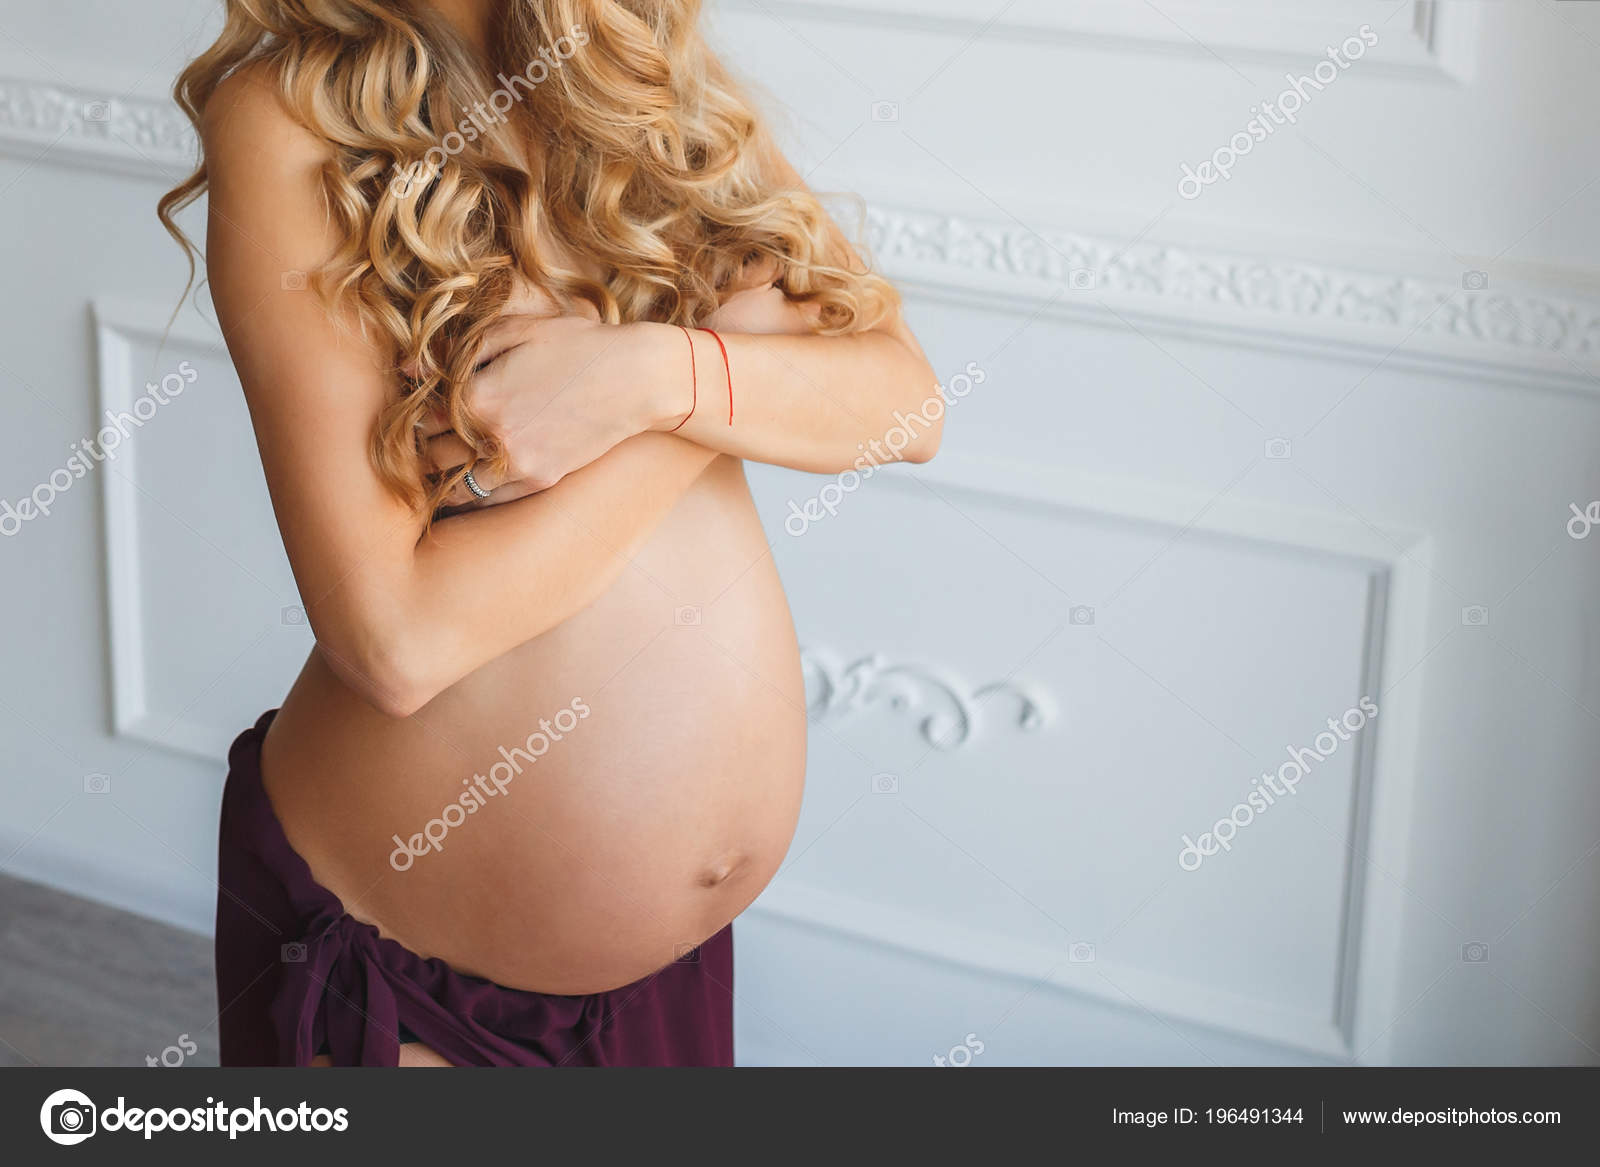 1600px x 1167px - Pregnant with beautiful naked belly stands against white ...